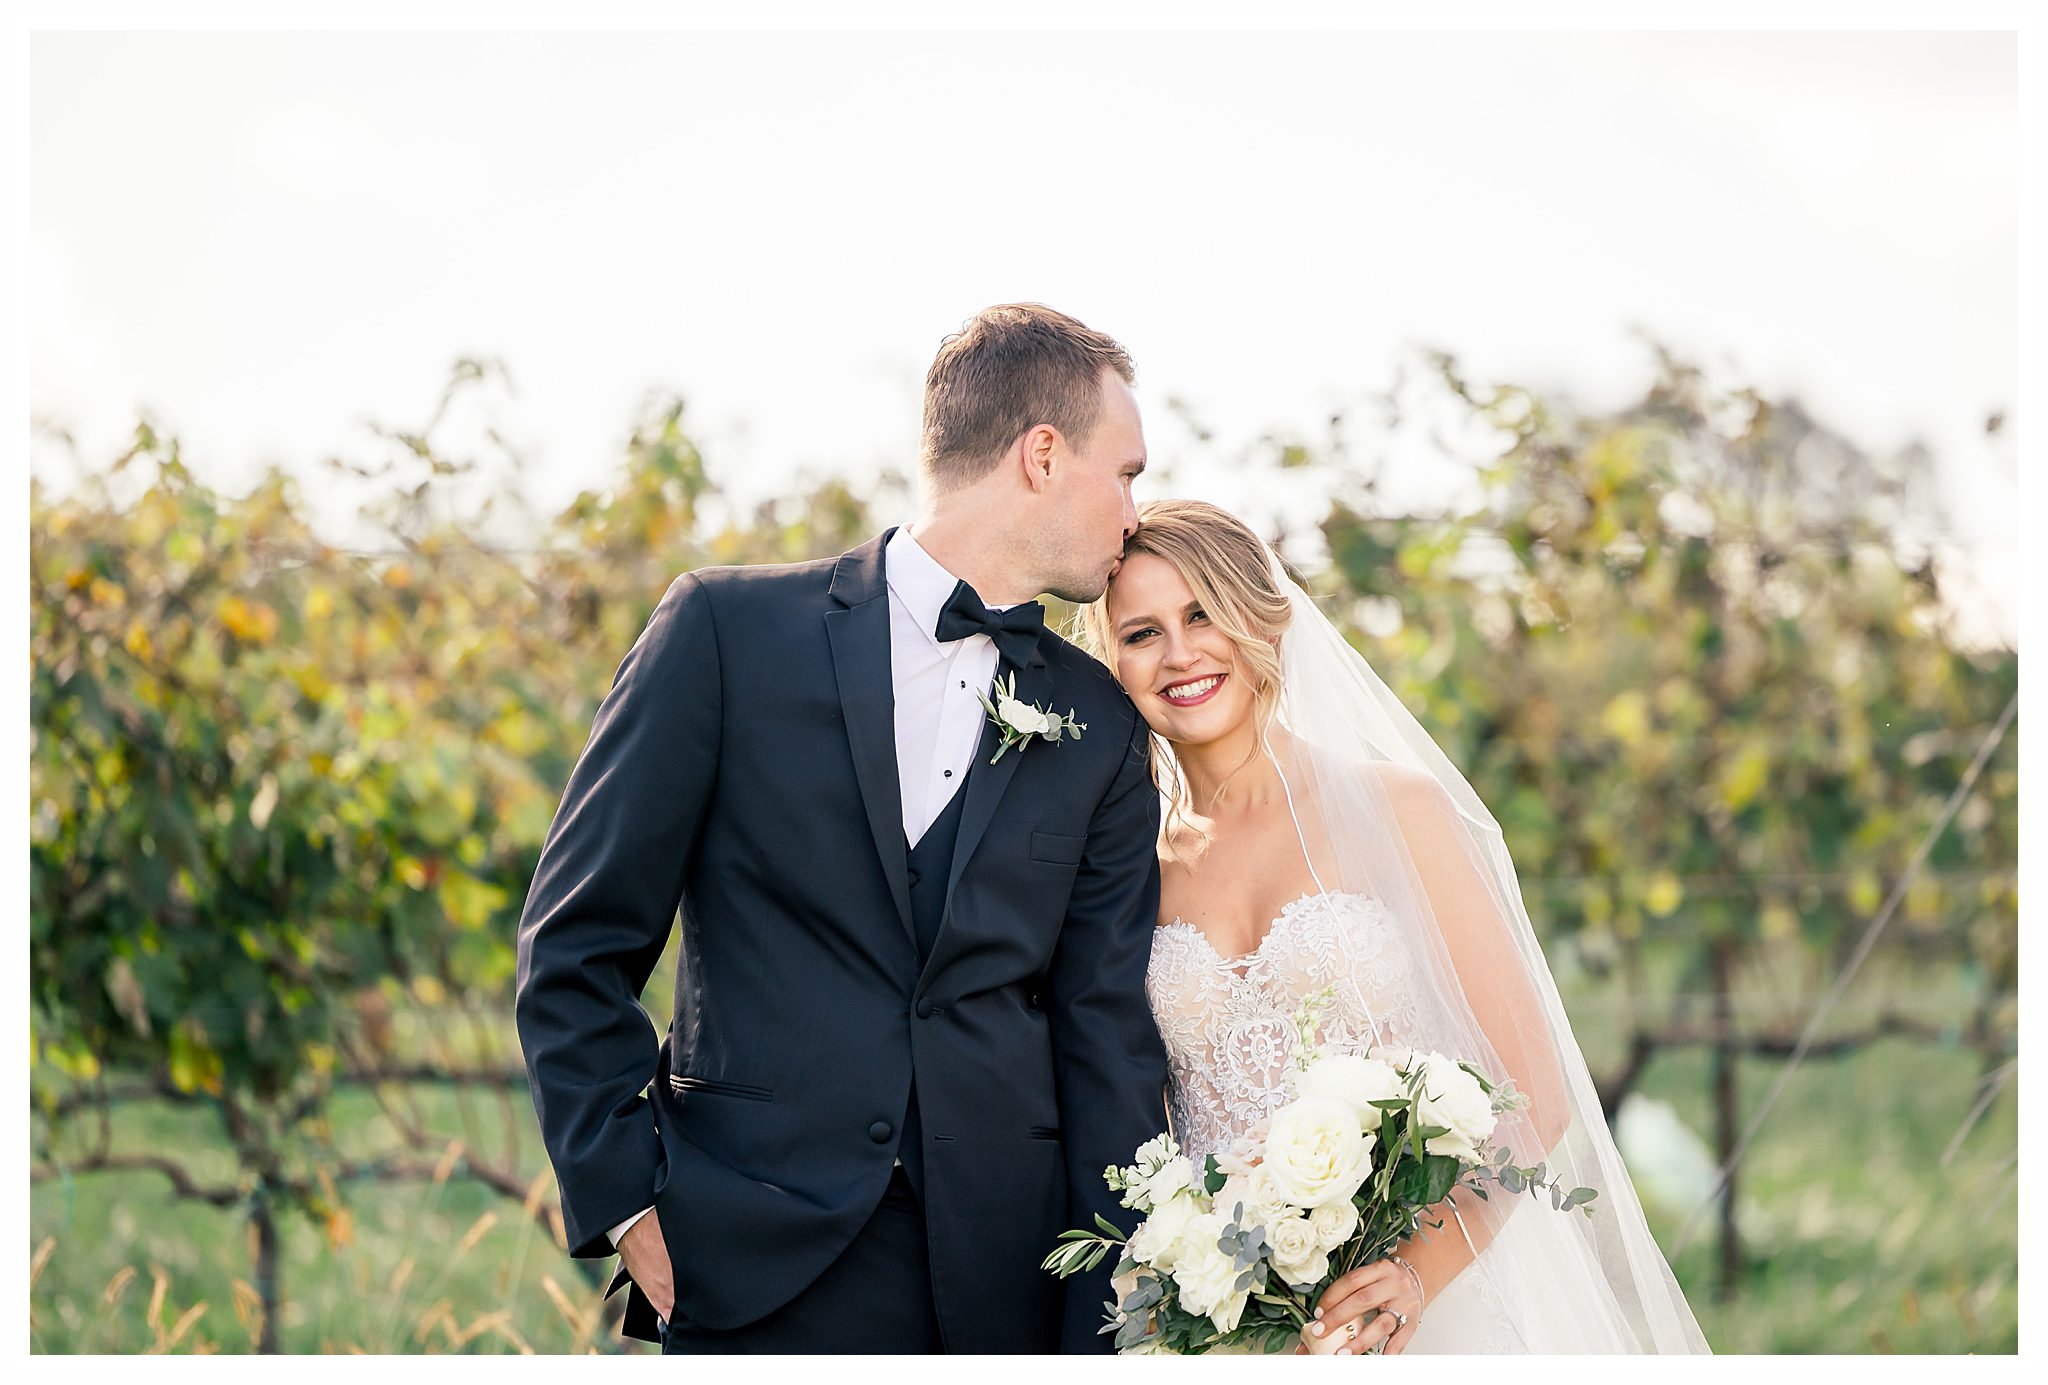 Yonah Mountain Wedding Vineyard Wedding Pictures of the Bride and Groom on a Fall Wedding Day by Five Fourteen Photography